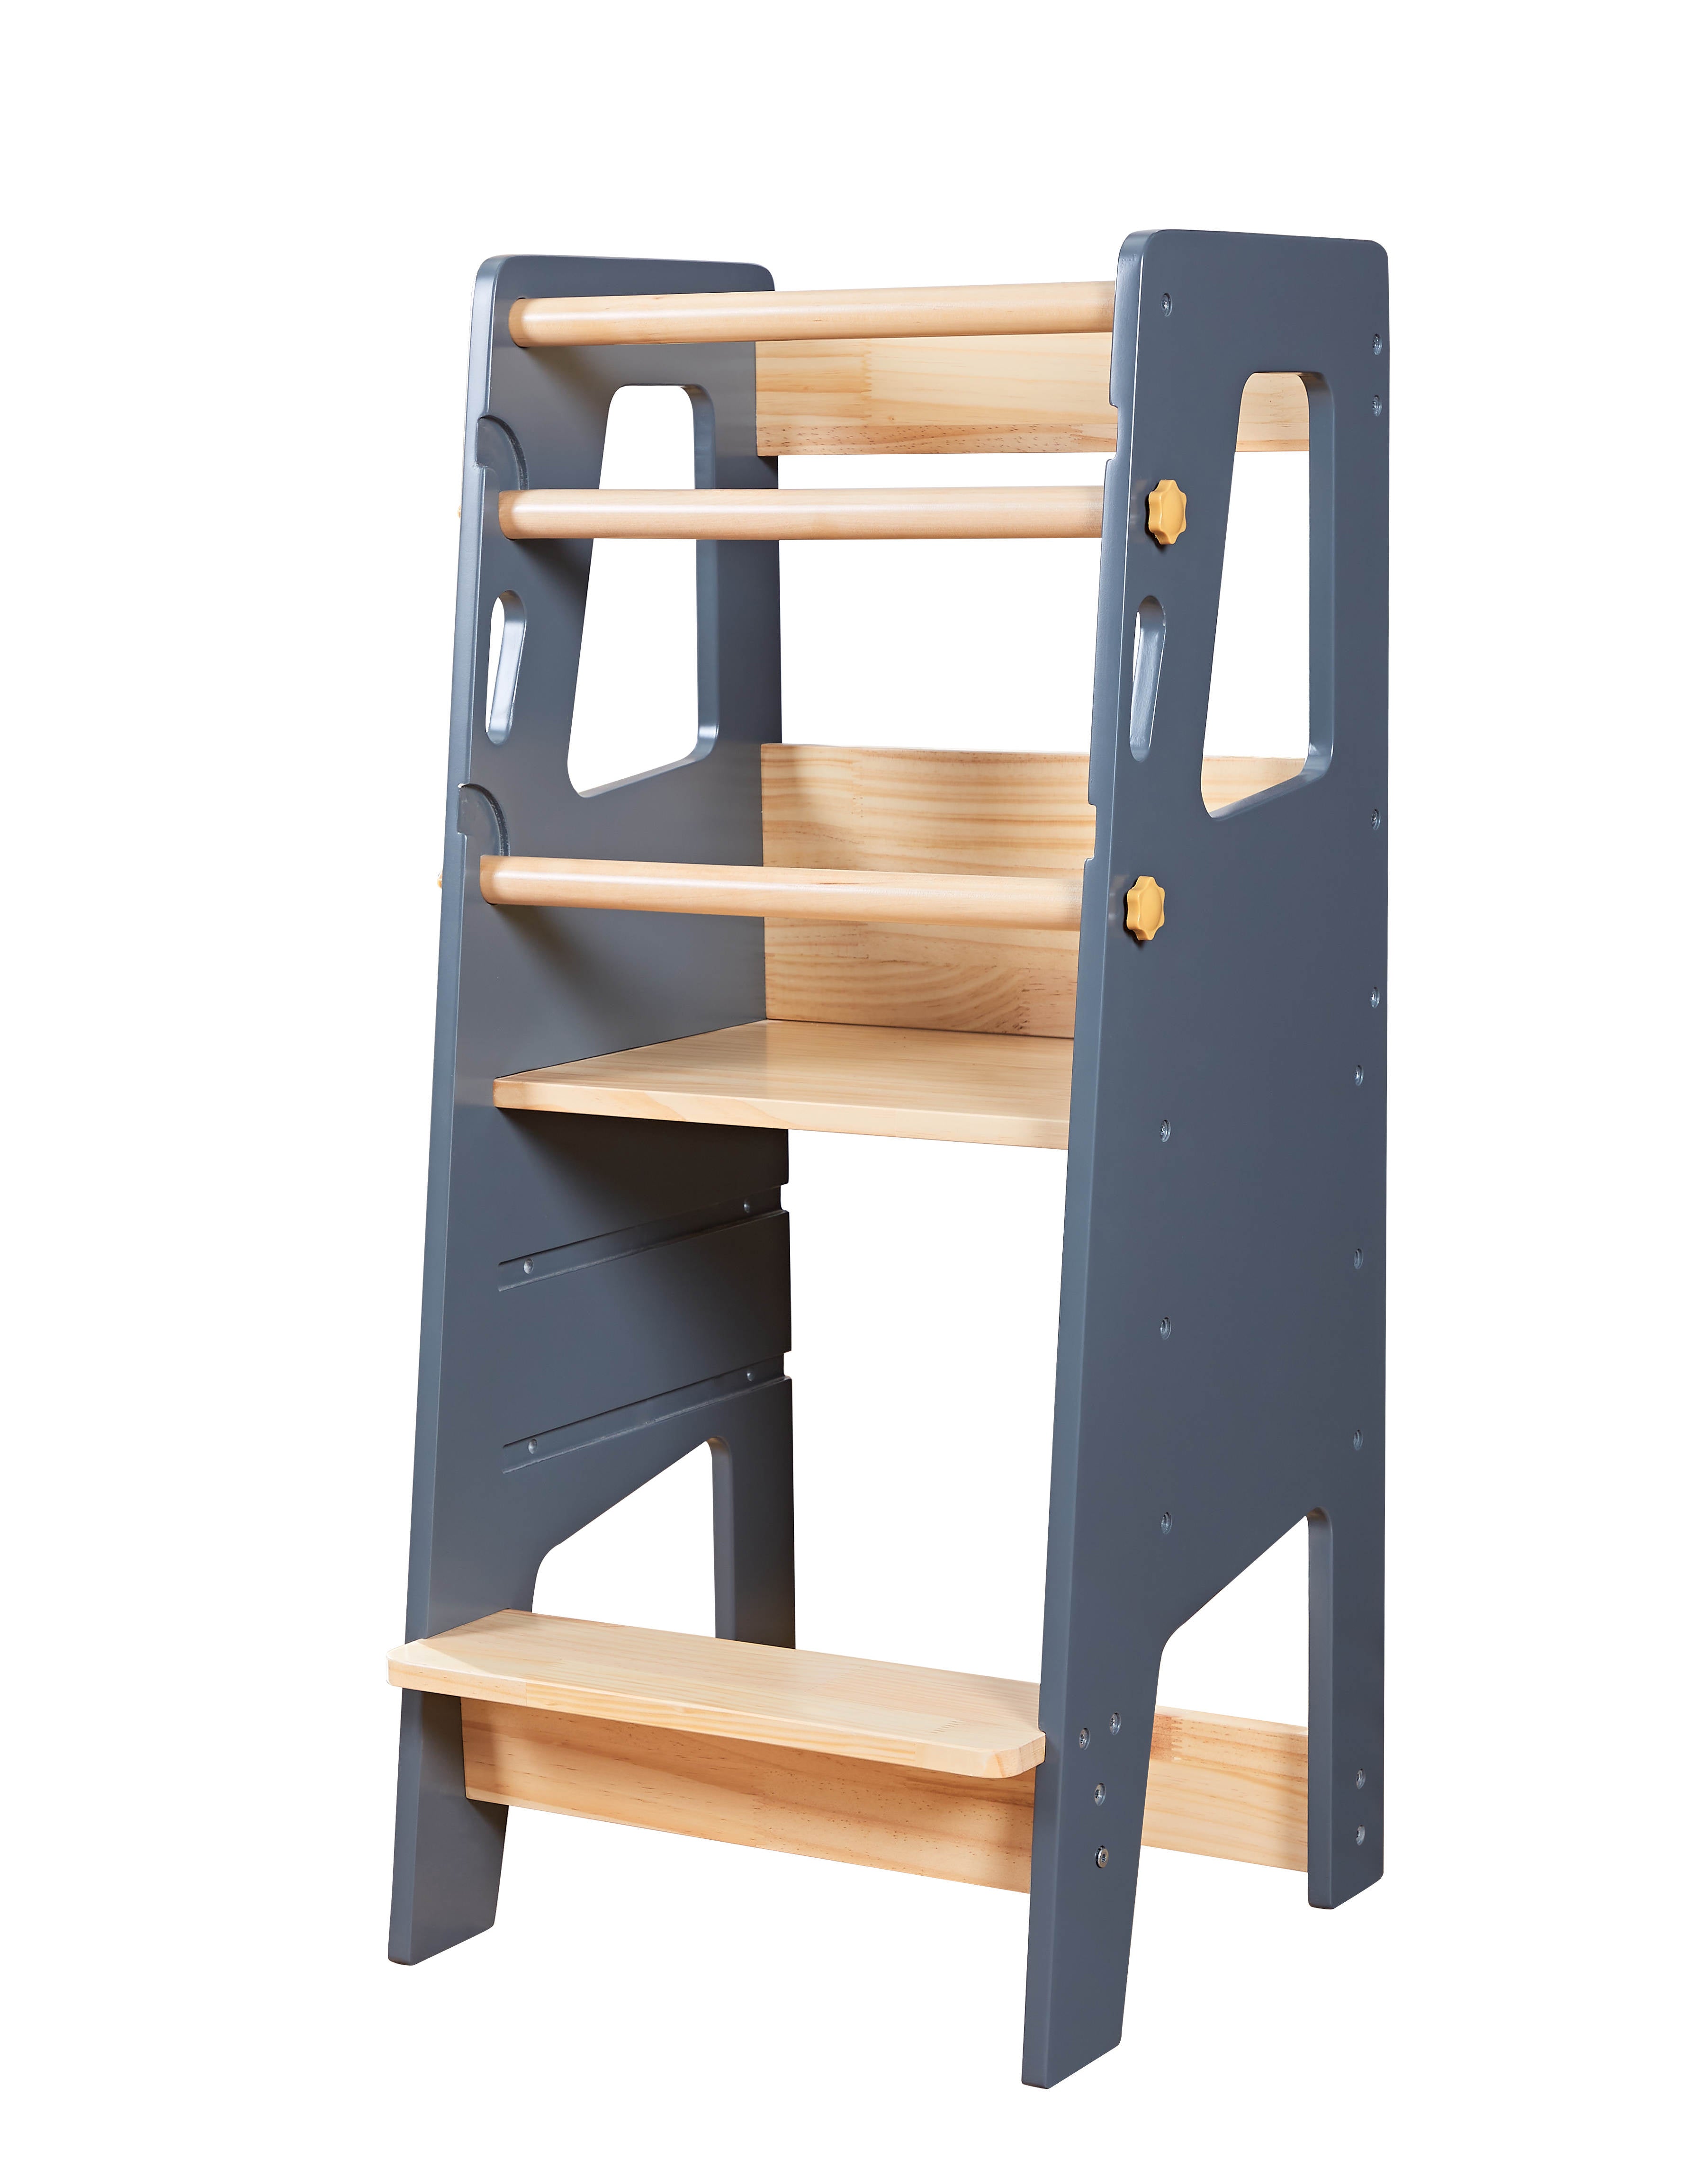 Toddler Learning Tower, Montessori Inspired Learning, Kitchen Helper Tower